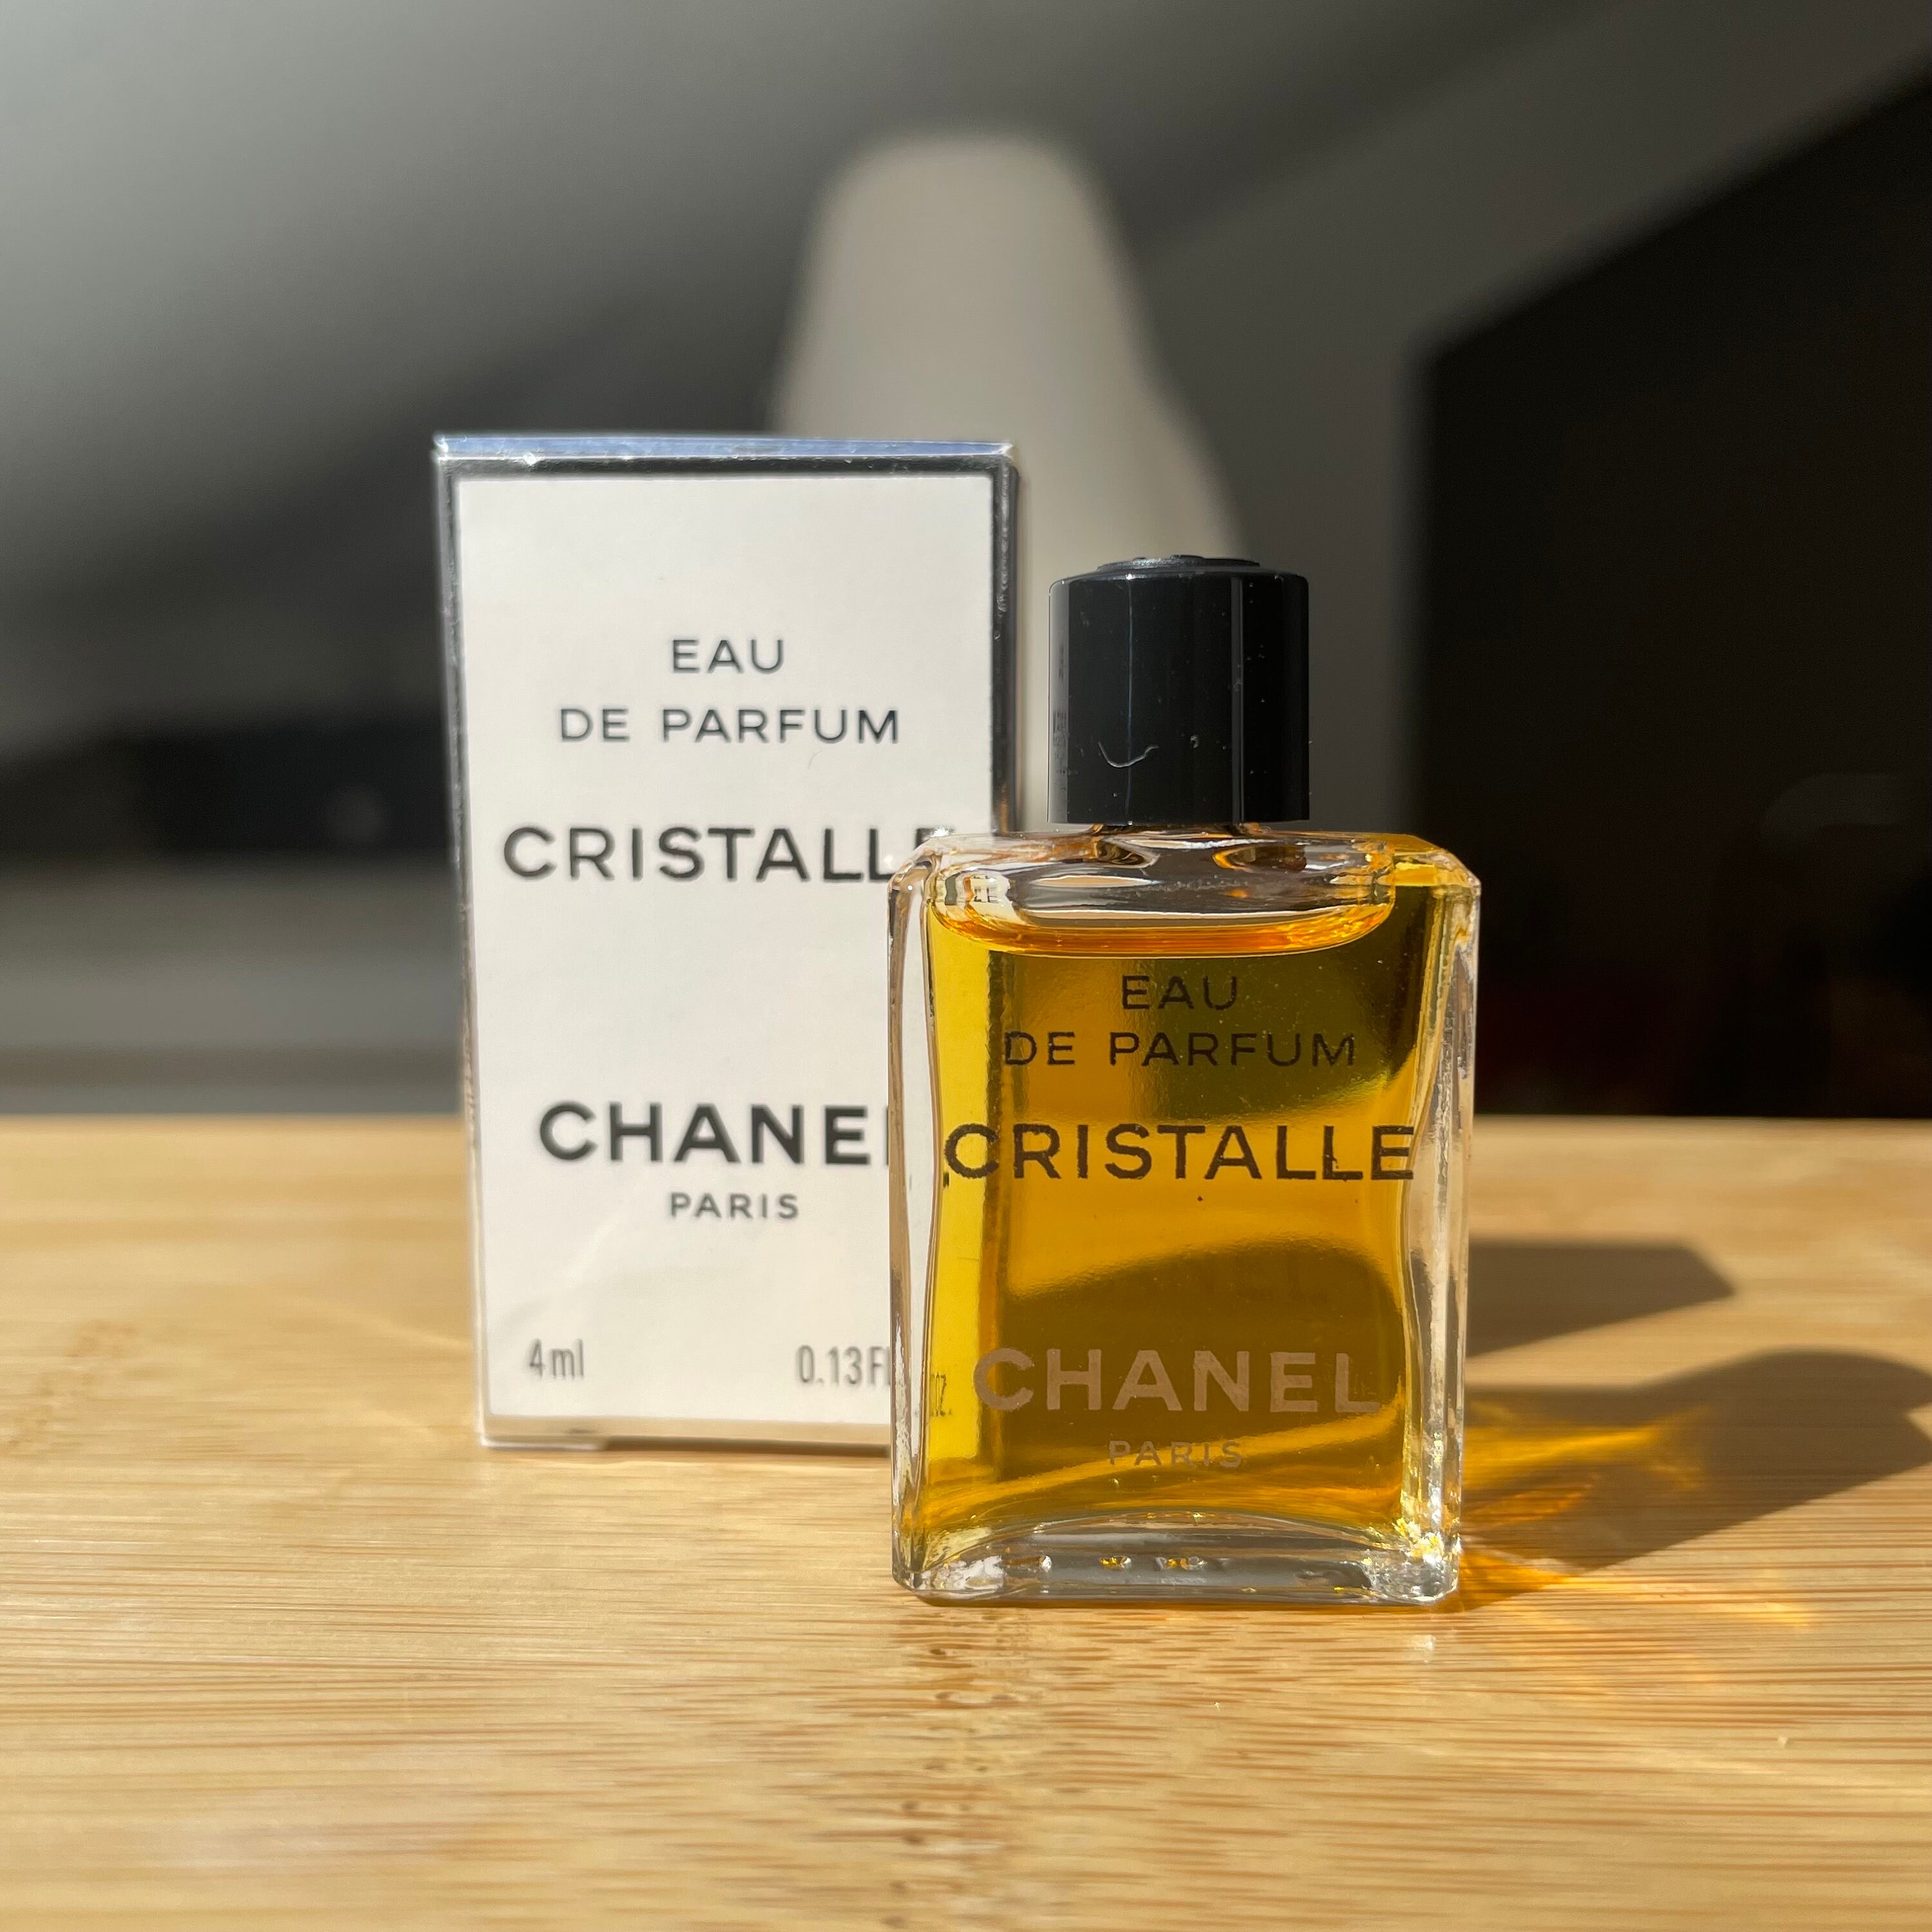 Les Exclusifs De Chanel Sycomore Review - All The Deets You Need